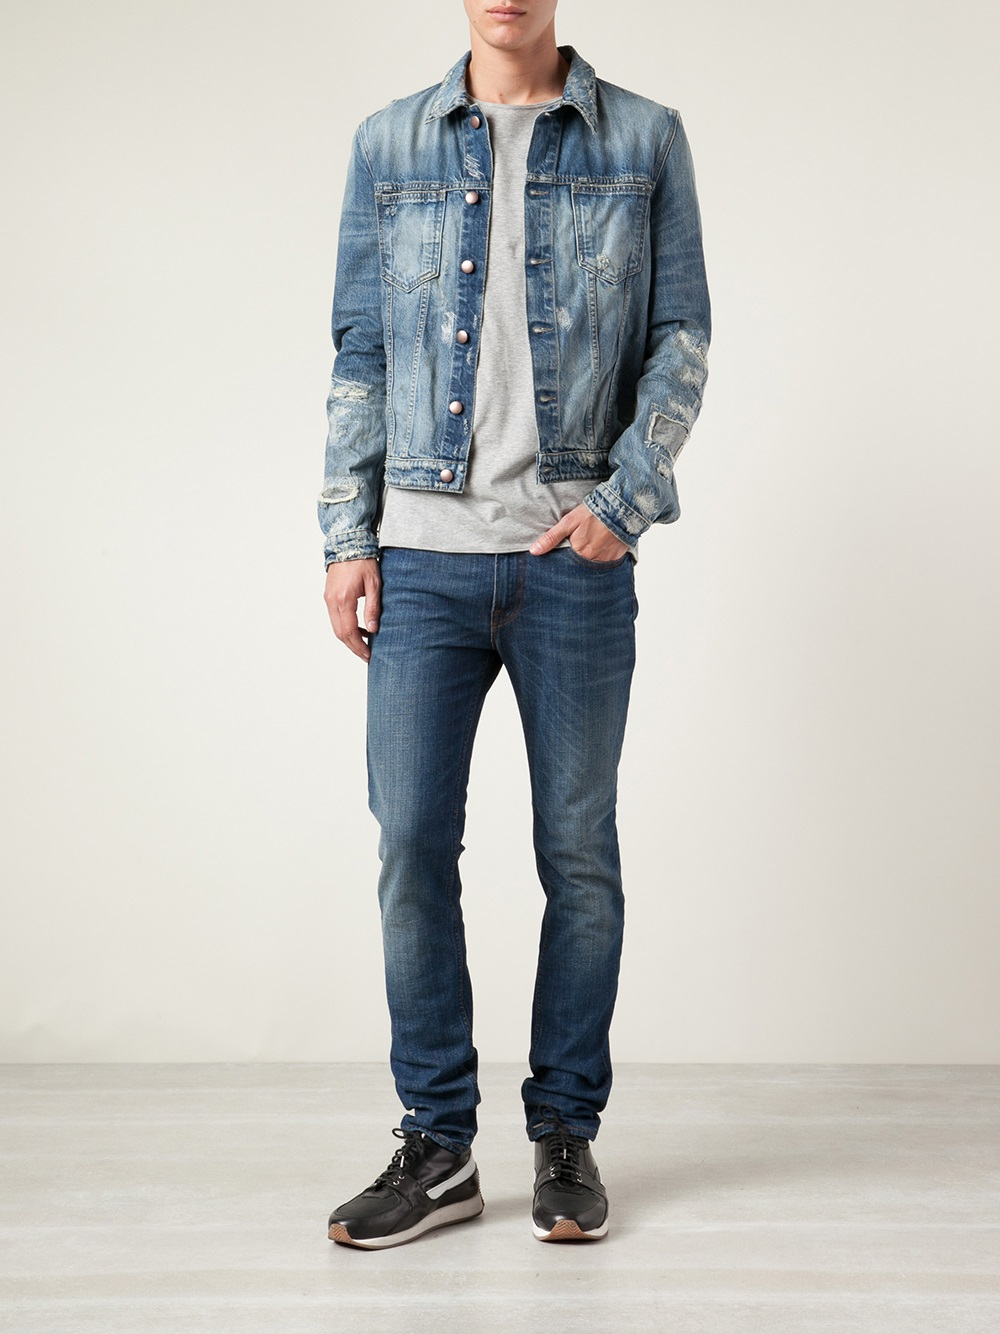 Lyst - Closed Distressed Jean Jacket in Blue for Men